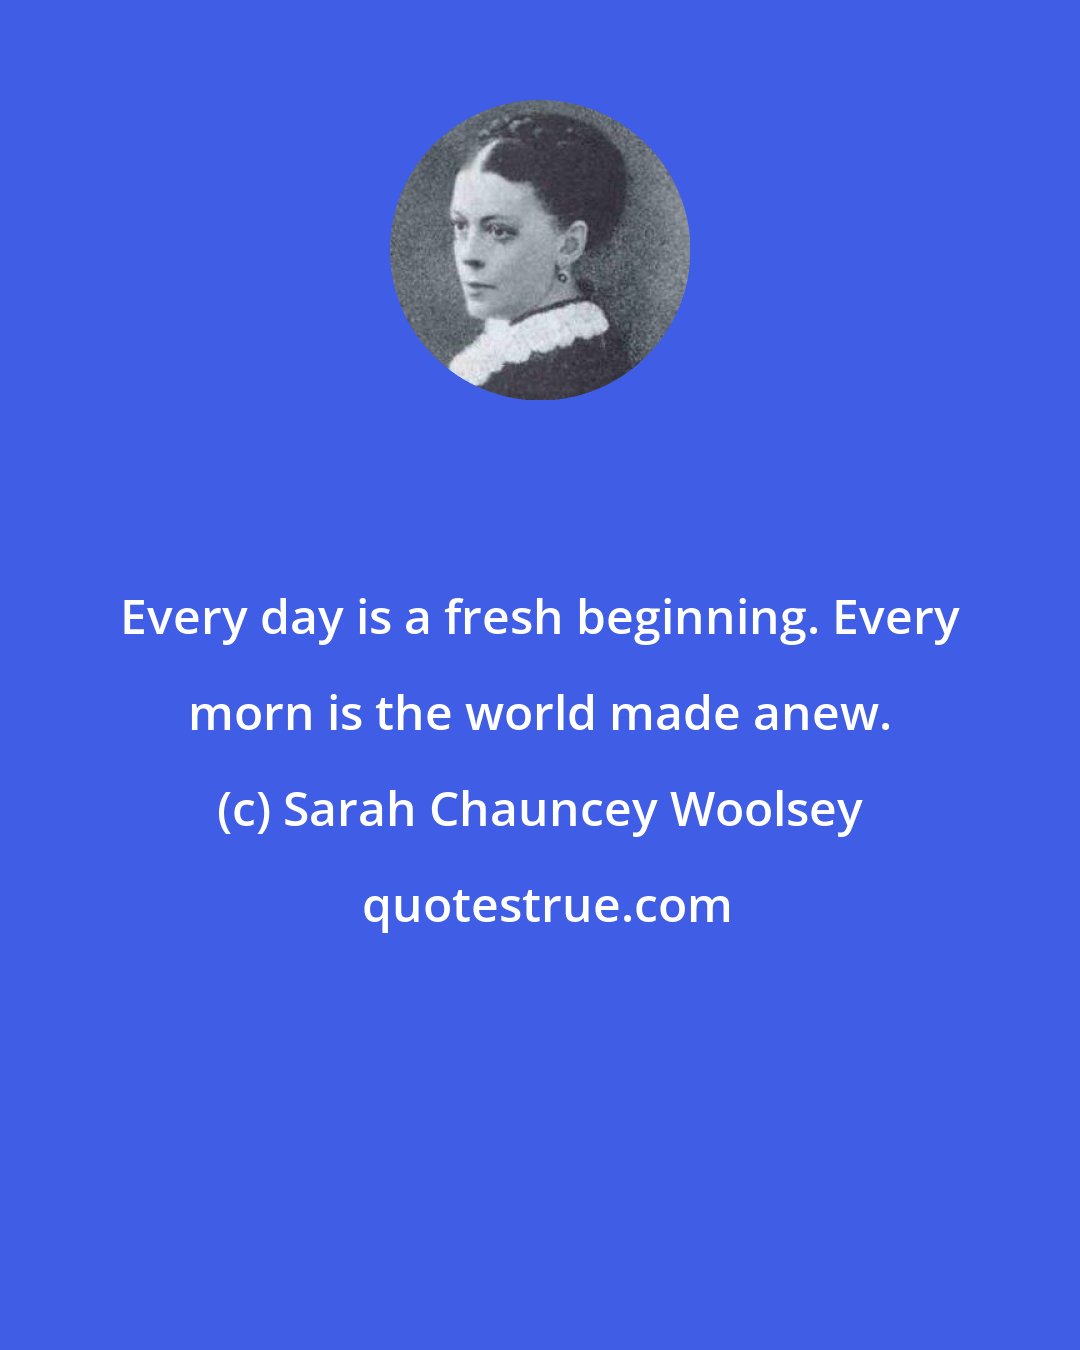 Sarah Chauncey Woolsey: Every day is a fresh beginning. Every morn is the world made anew.